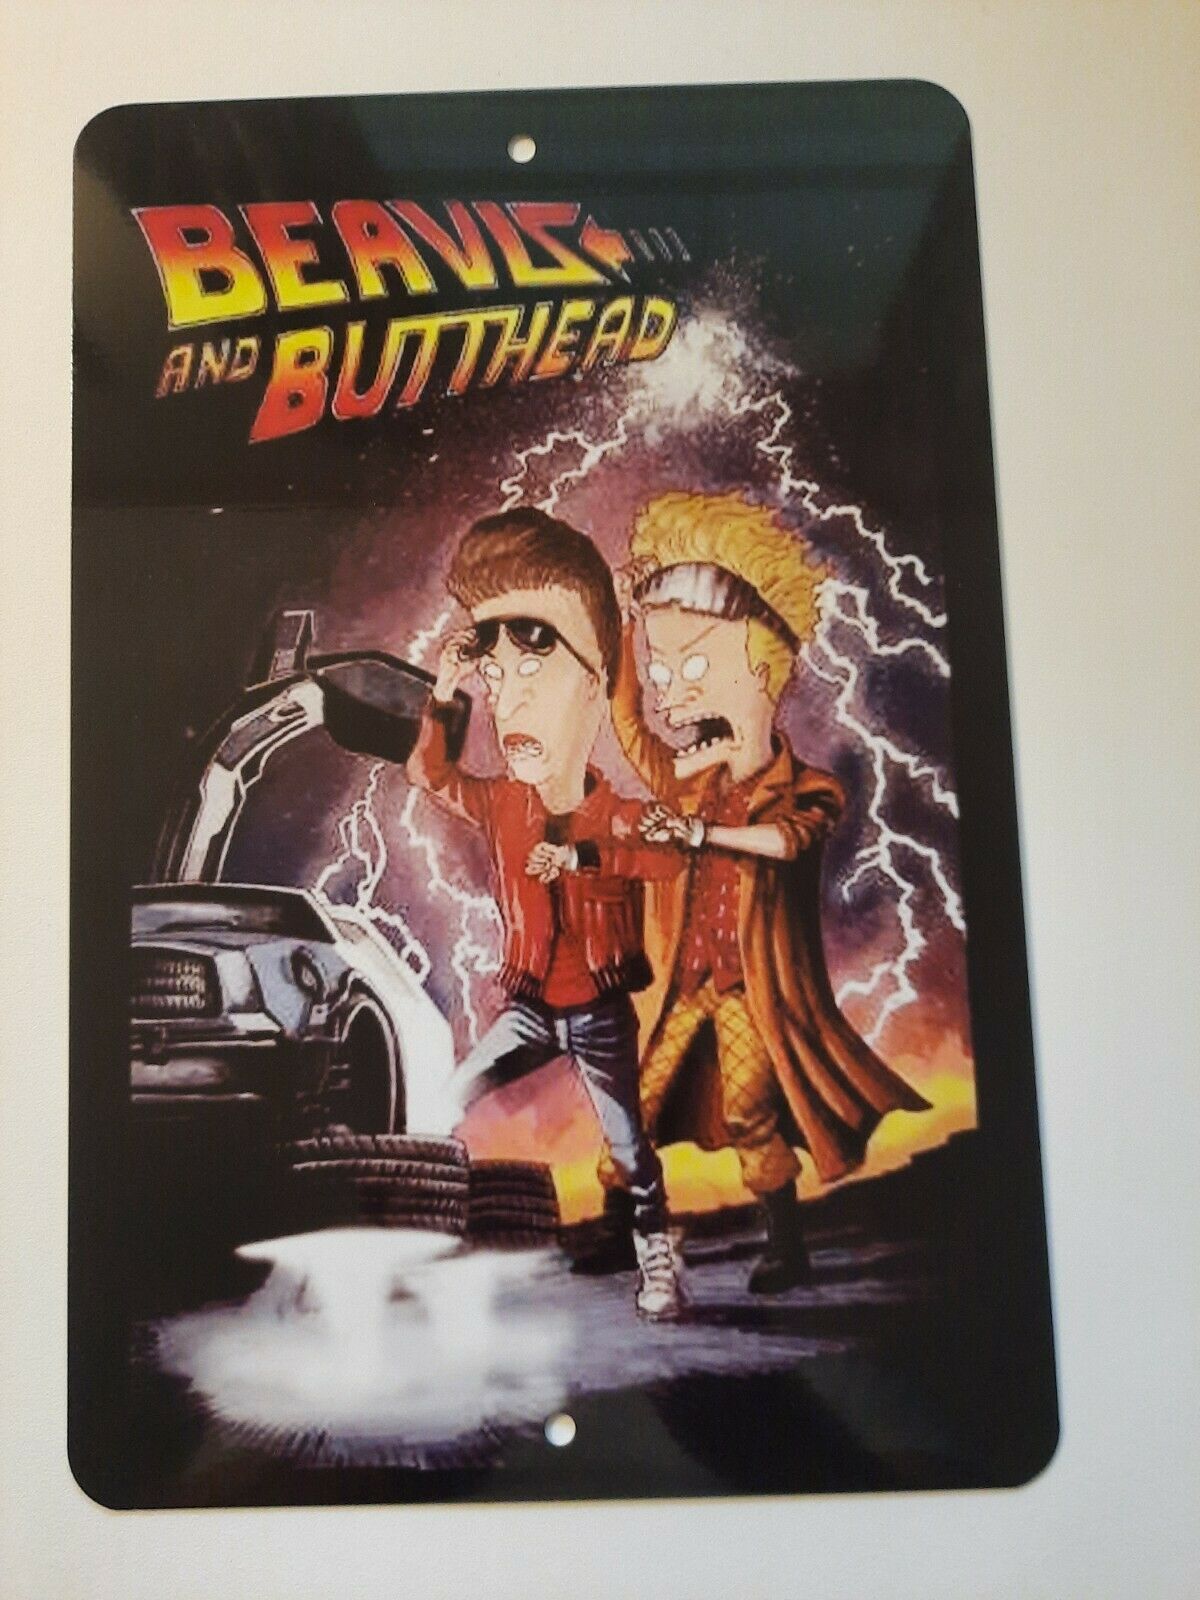 Back to the Beavis and Butthead Future Funny 8x12 Metal Wall Sign Movie Poster Cartoon